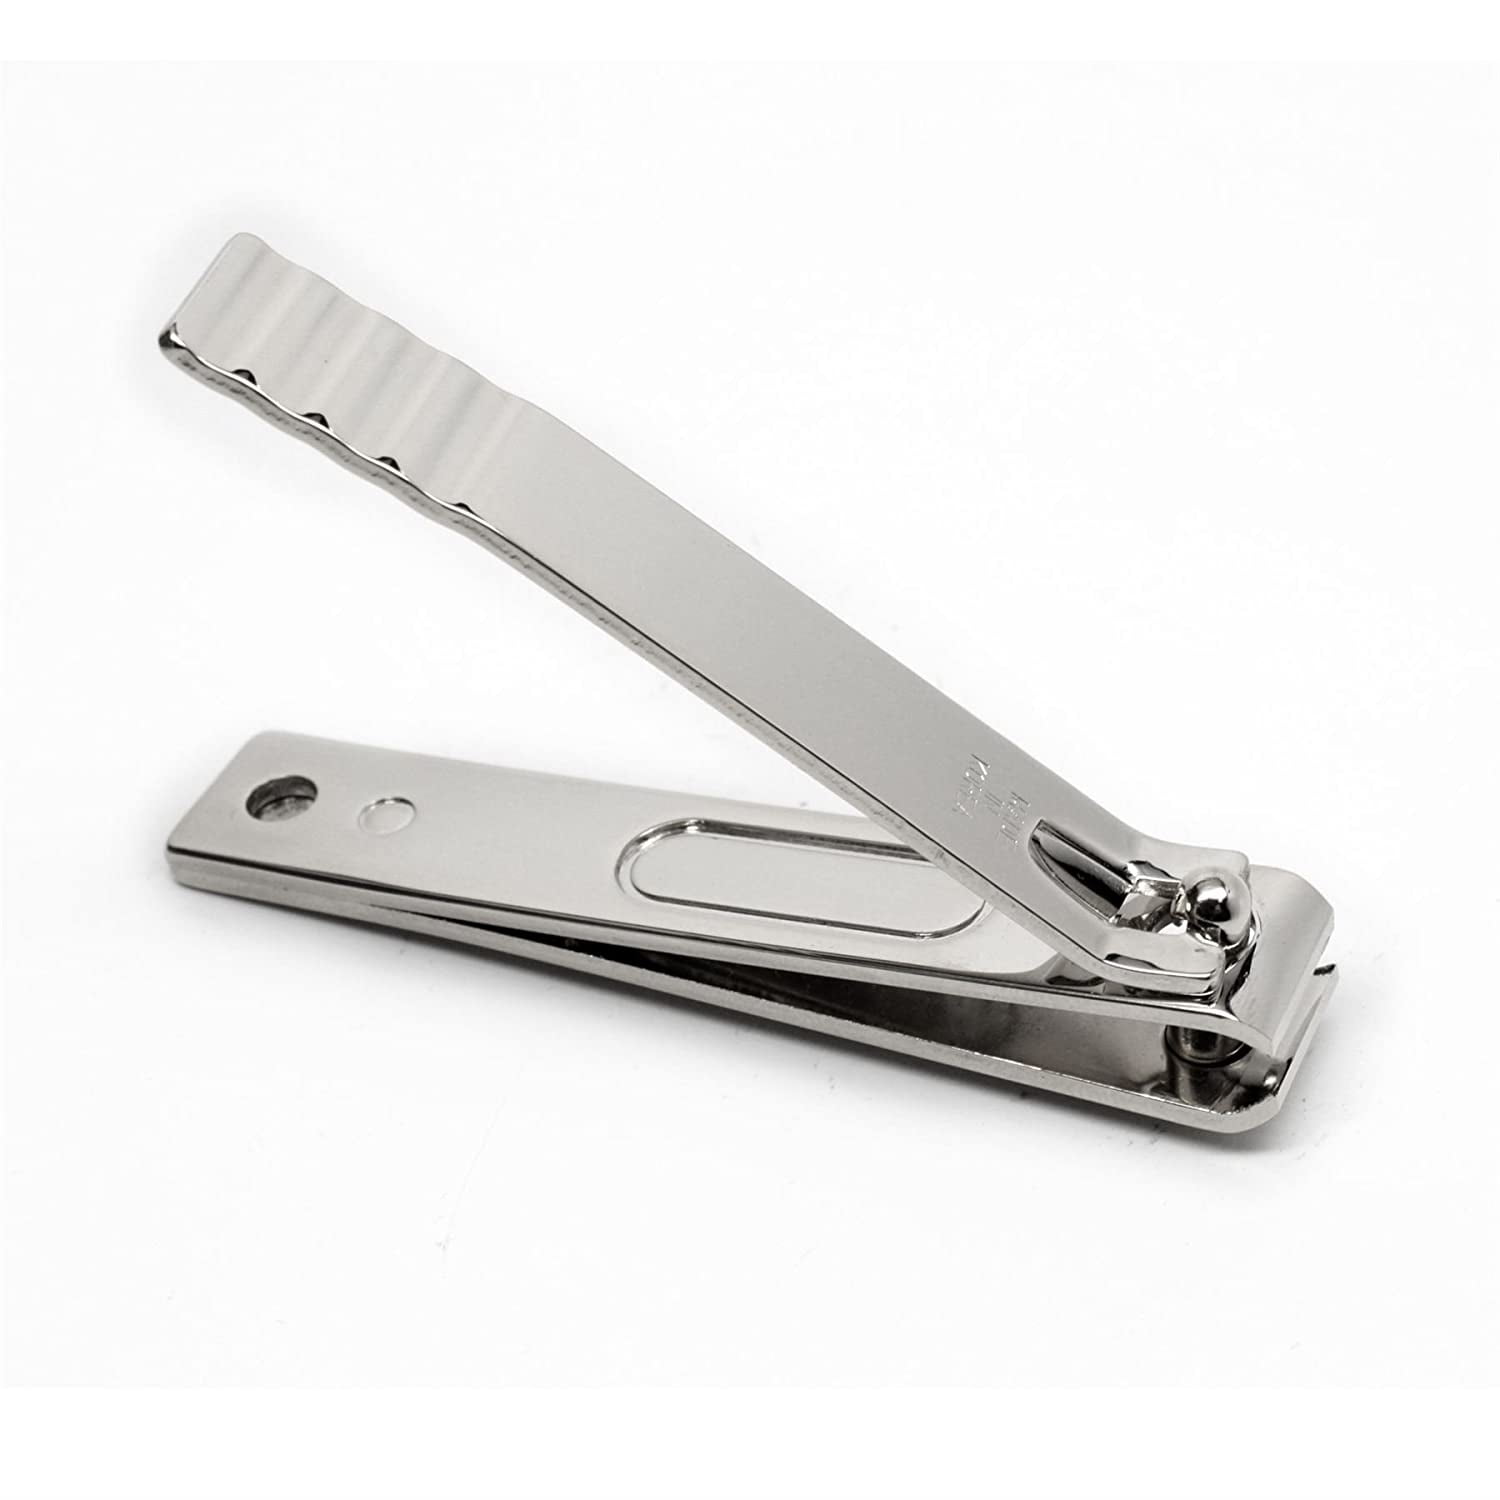 SANJINFON 3 in 1 Nail Clippers with 360 Degree Rotating Head